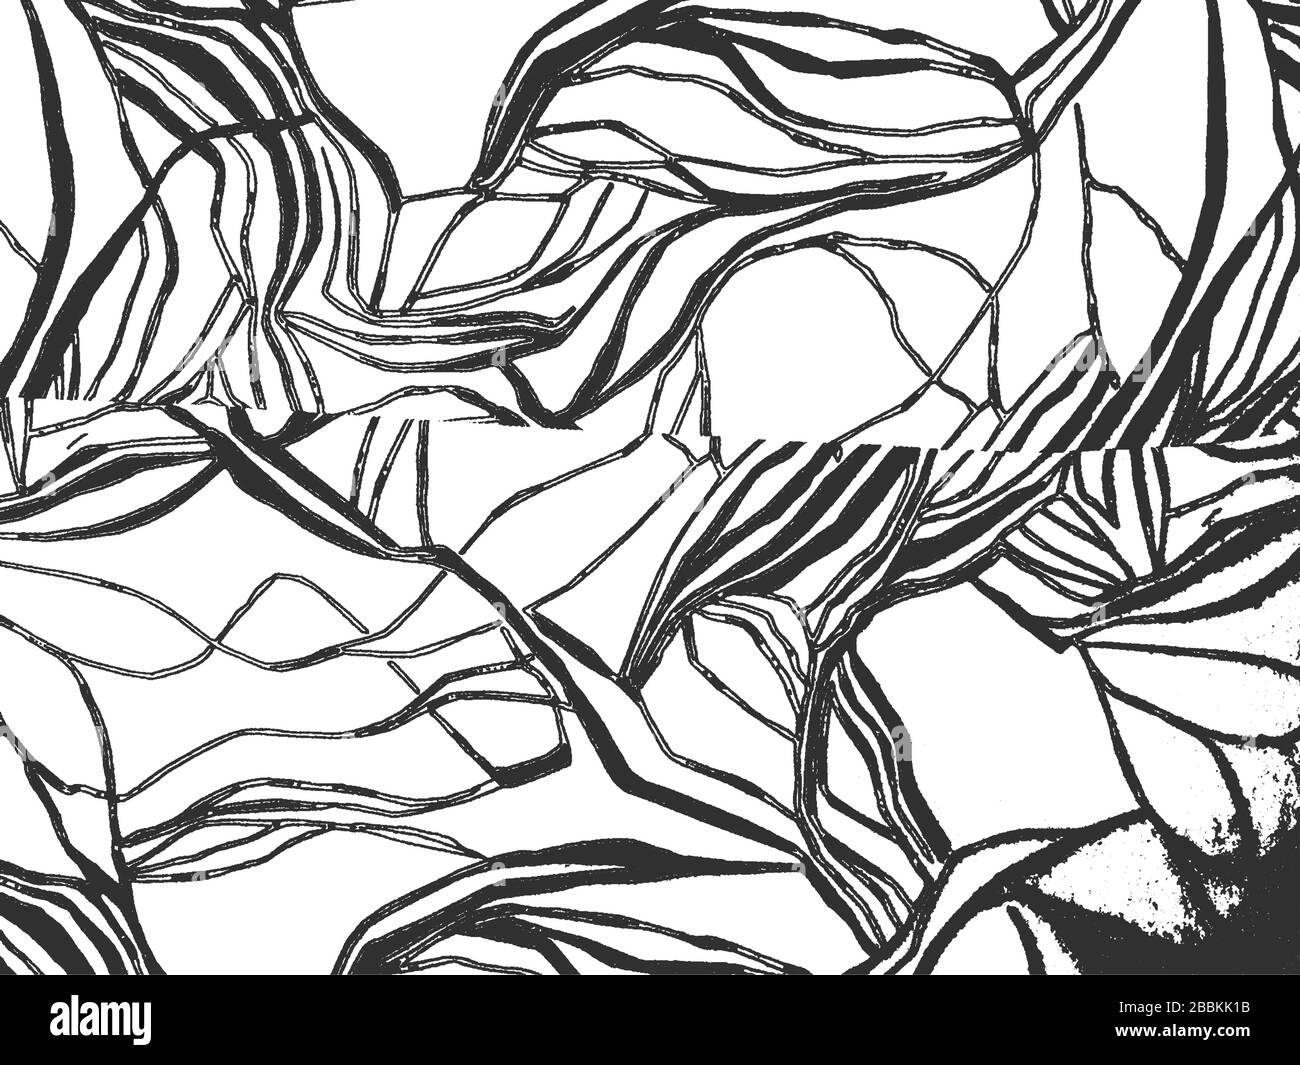 Distress grunge vector texture of fabric with zebra ornament. Black and white background. EPS 8 illustration Stock Vector